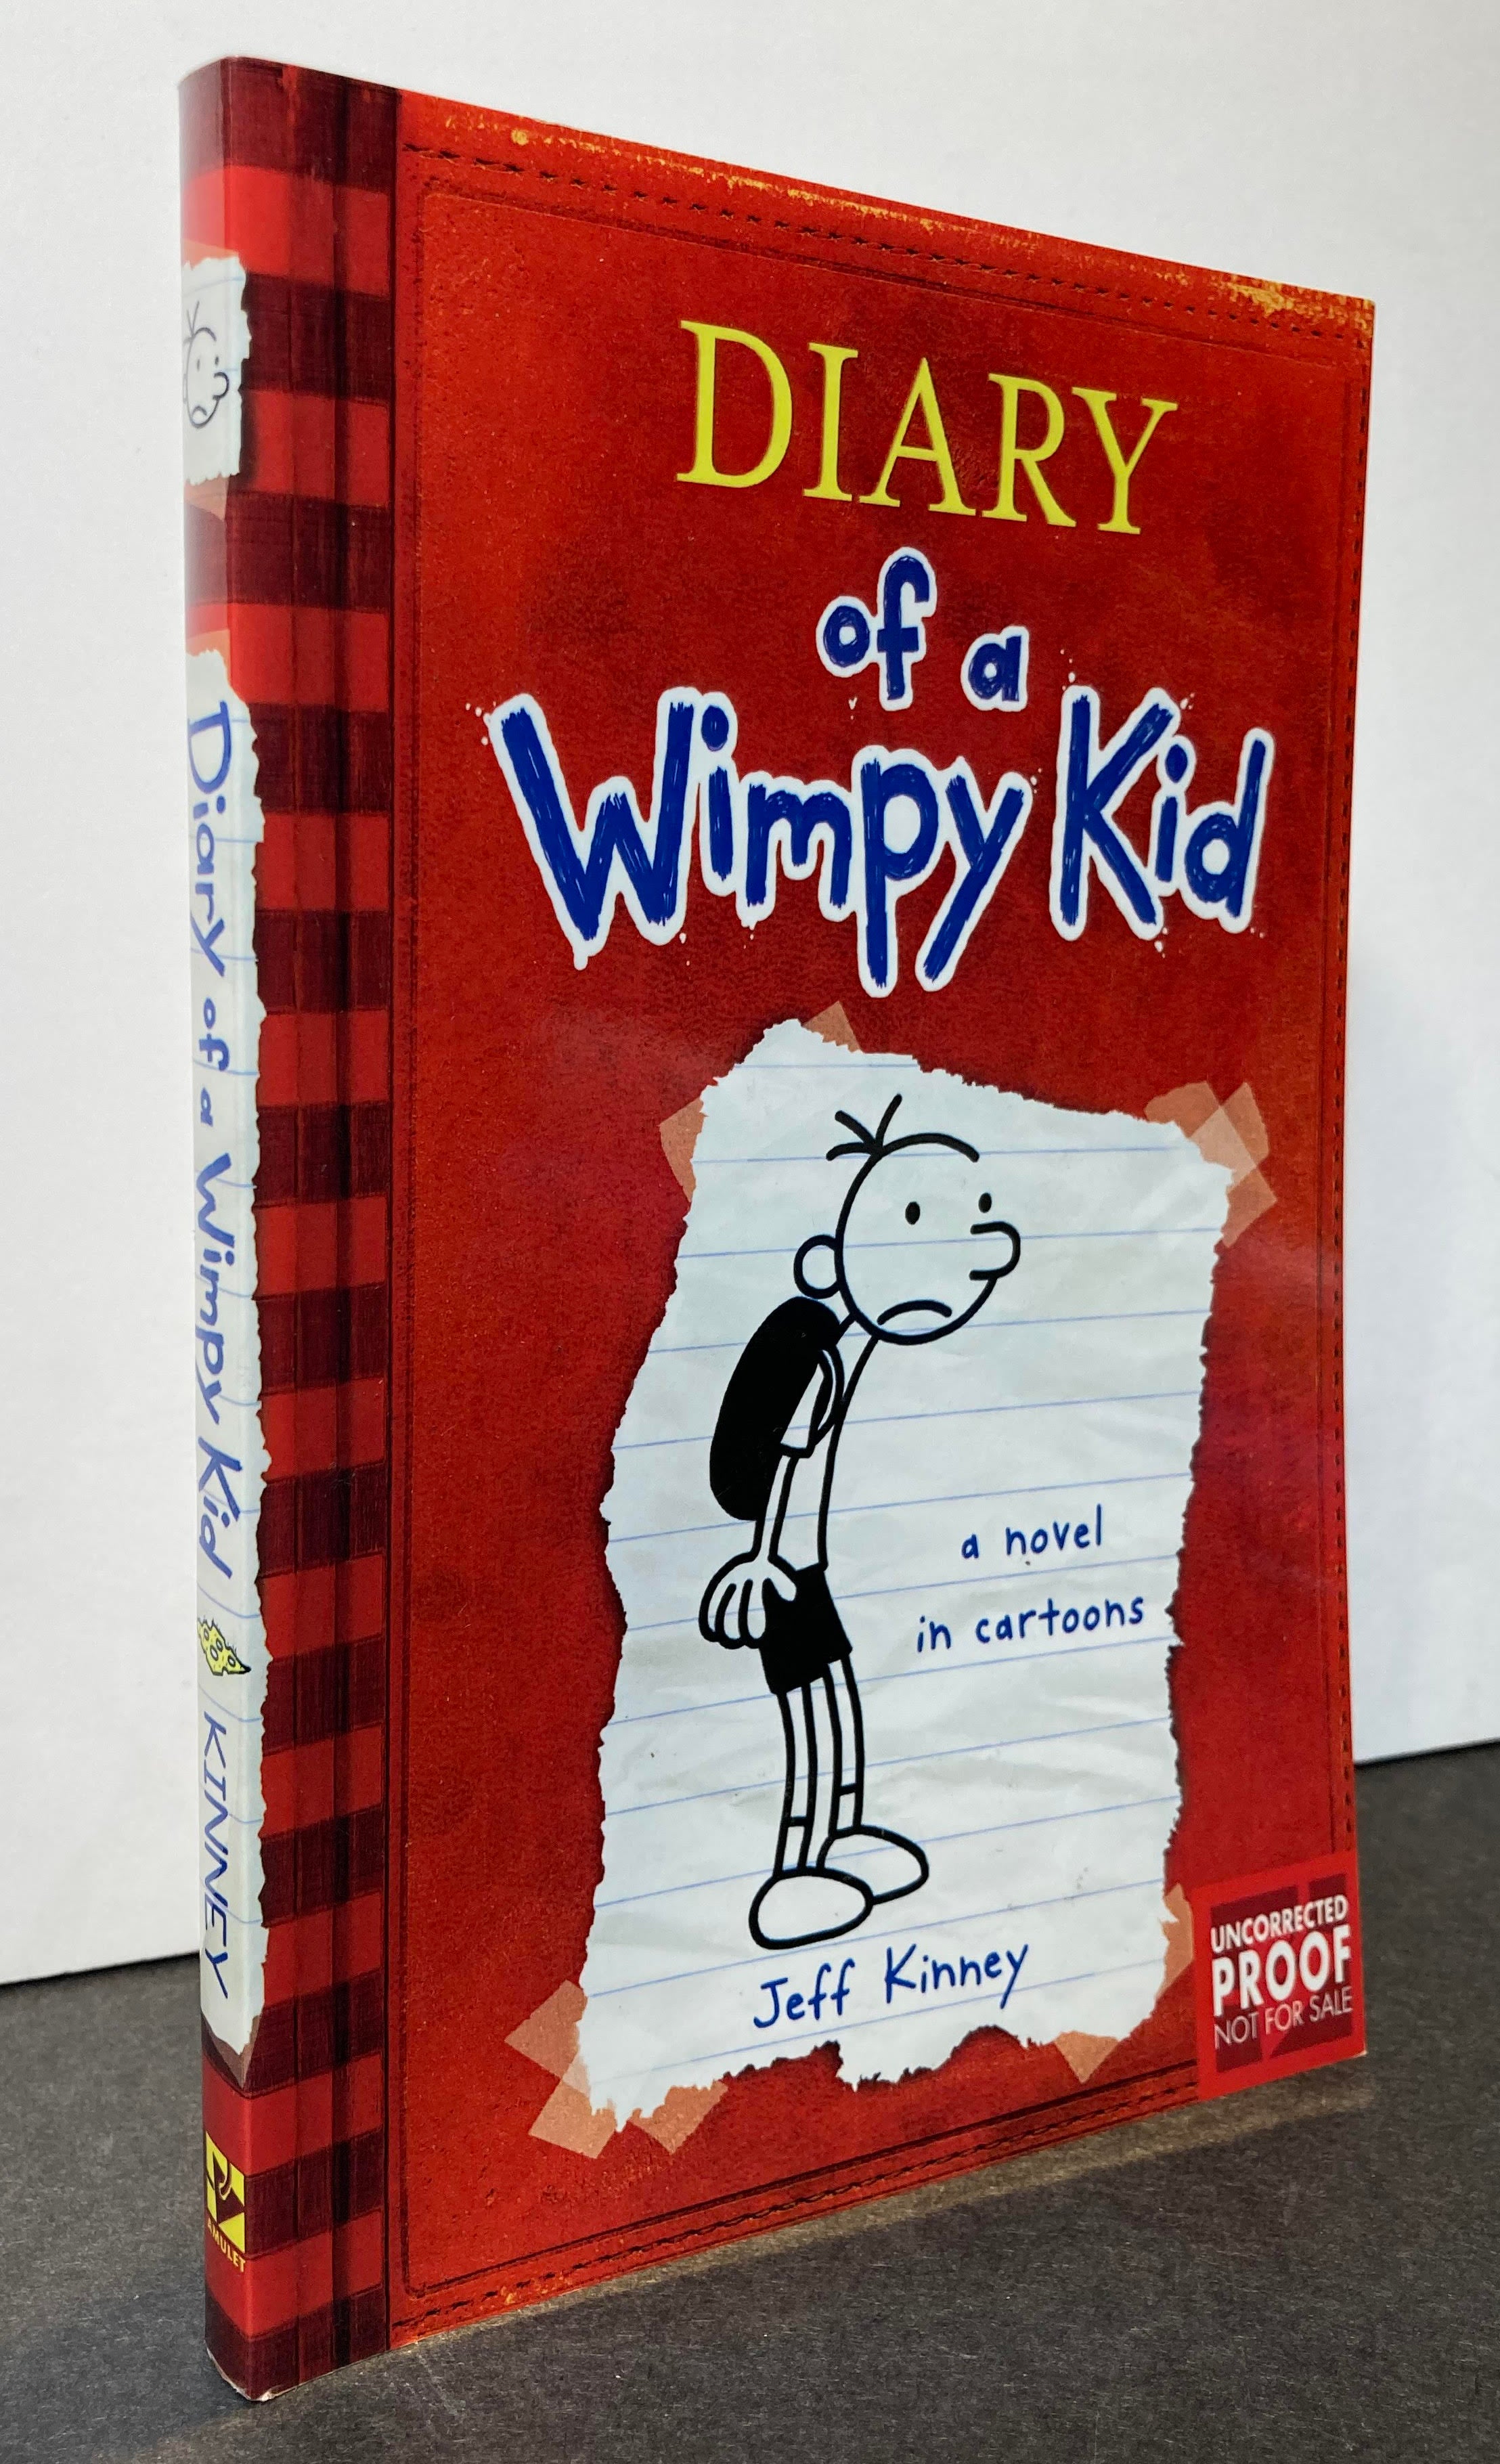 Diary of a Wimpy Kid – Books of Wonder